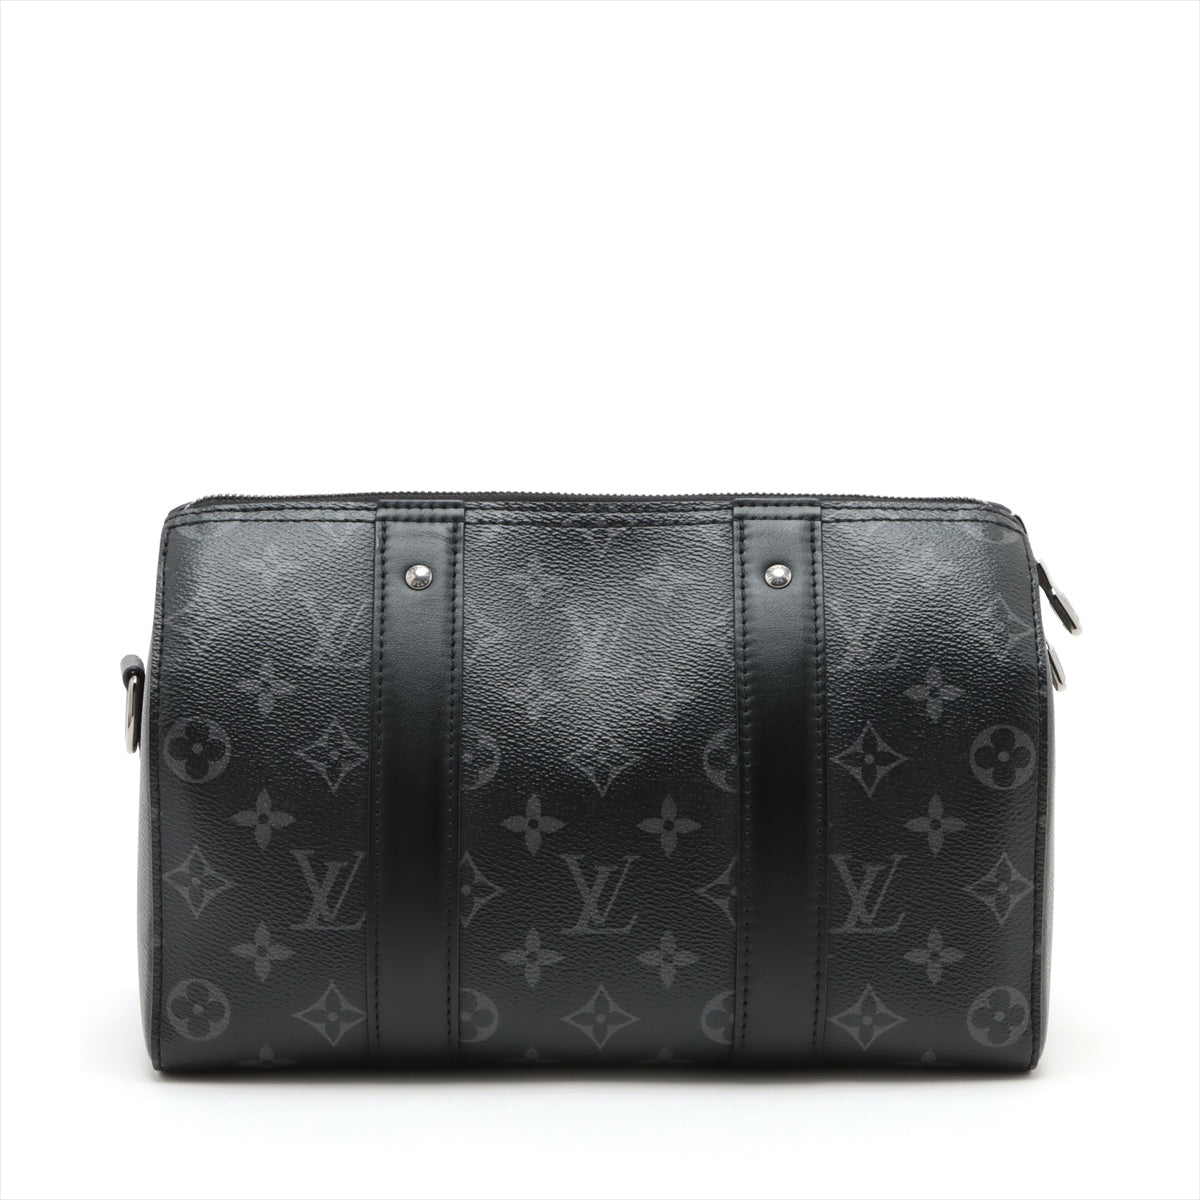 Louis Vuitton Monogram Eclipse City Keepall M45936 There was an RFID response